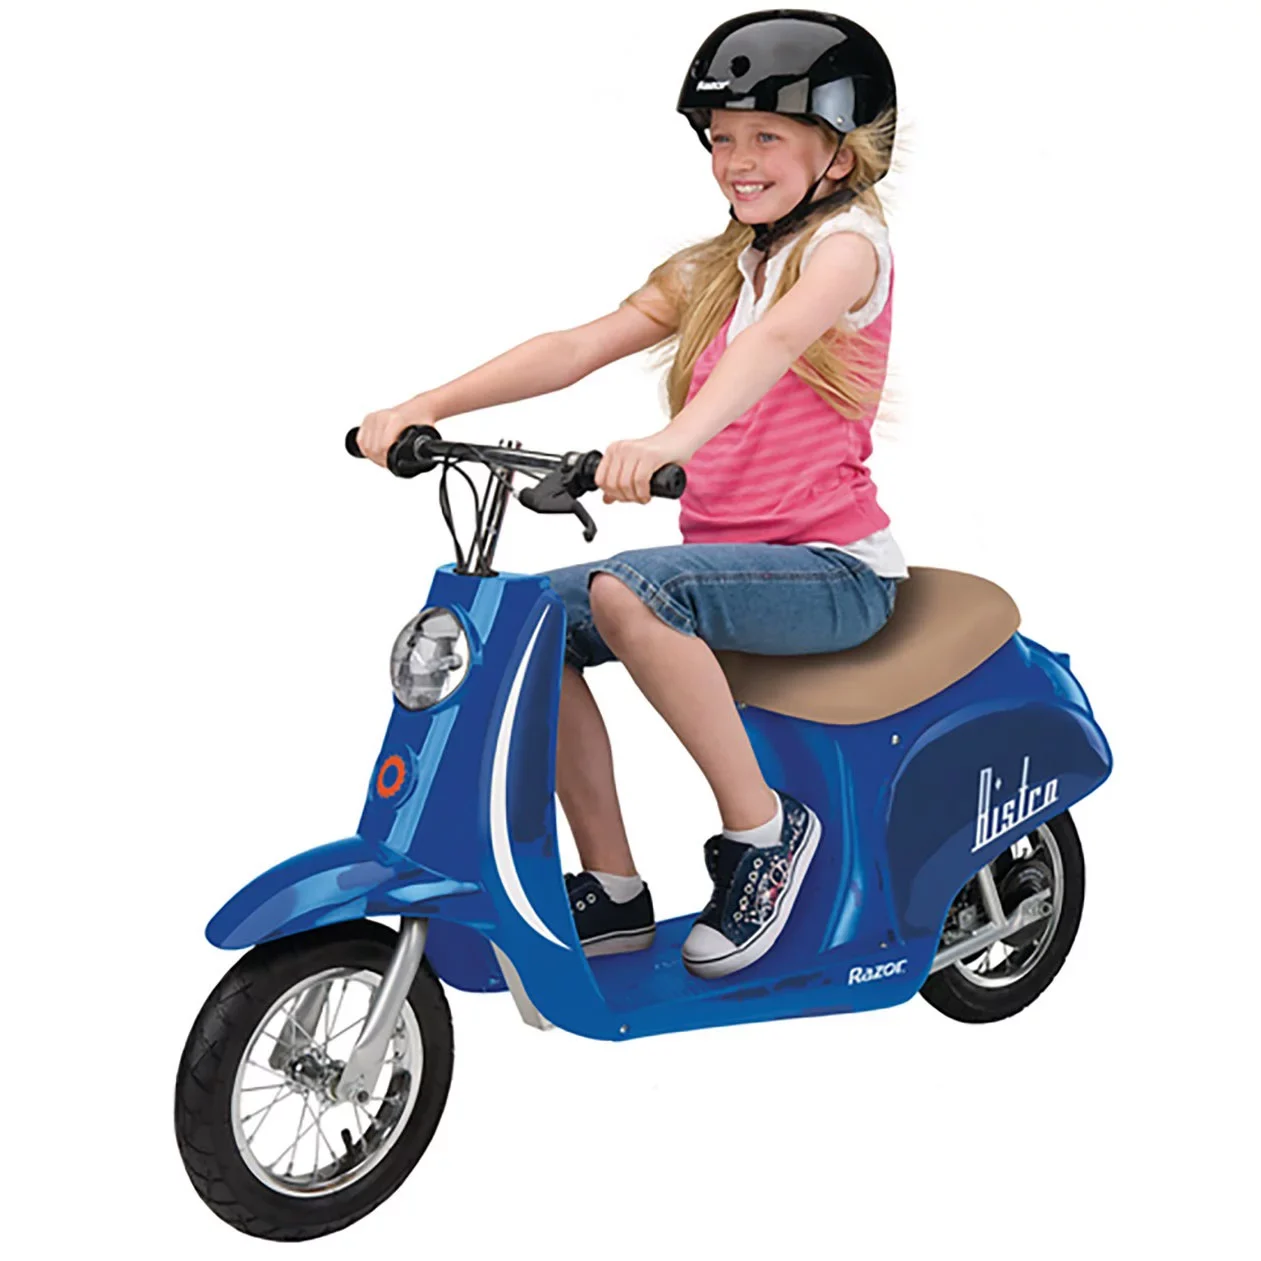 Best Mini Dirt Bikes For Kids: A Complete Buying Guide